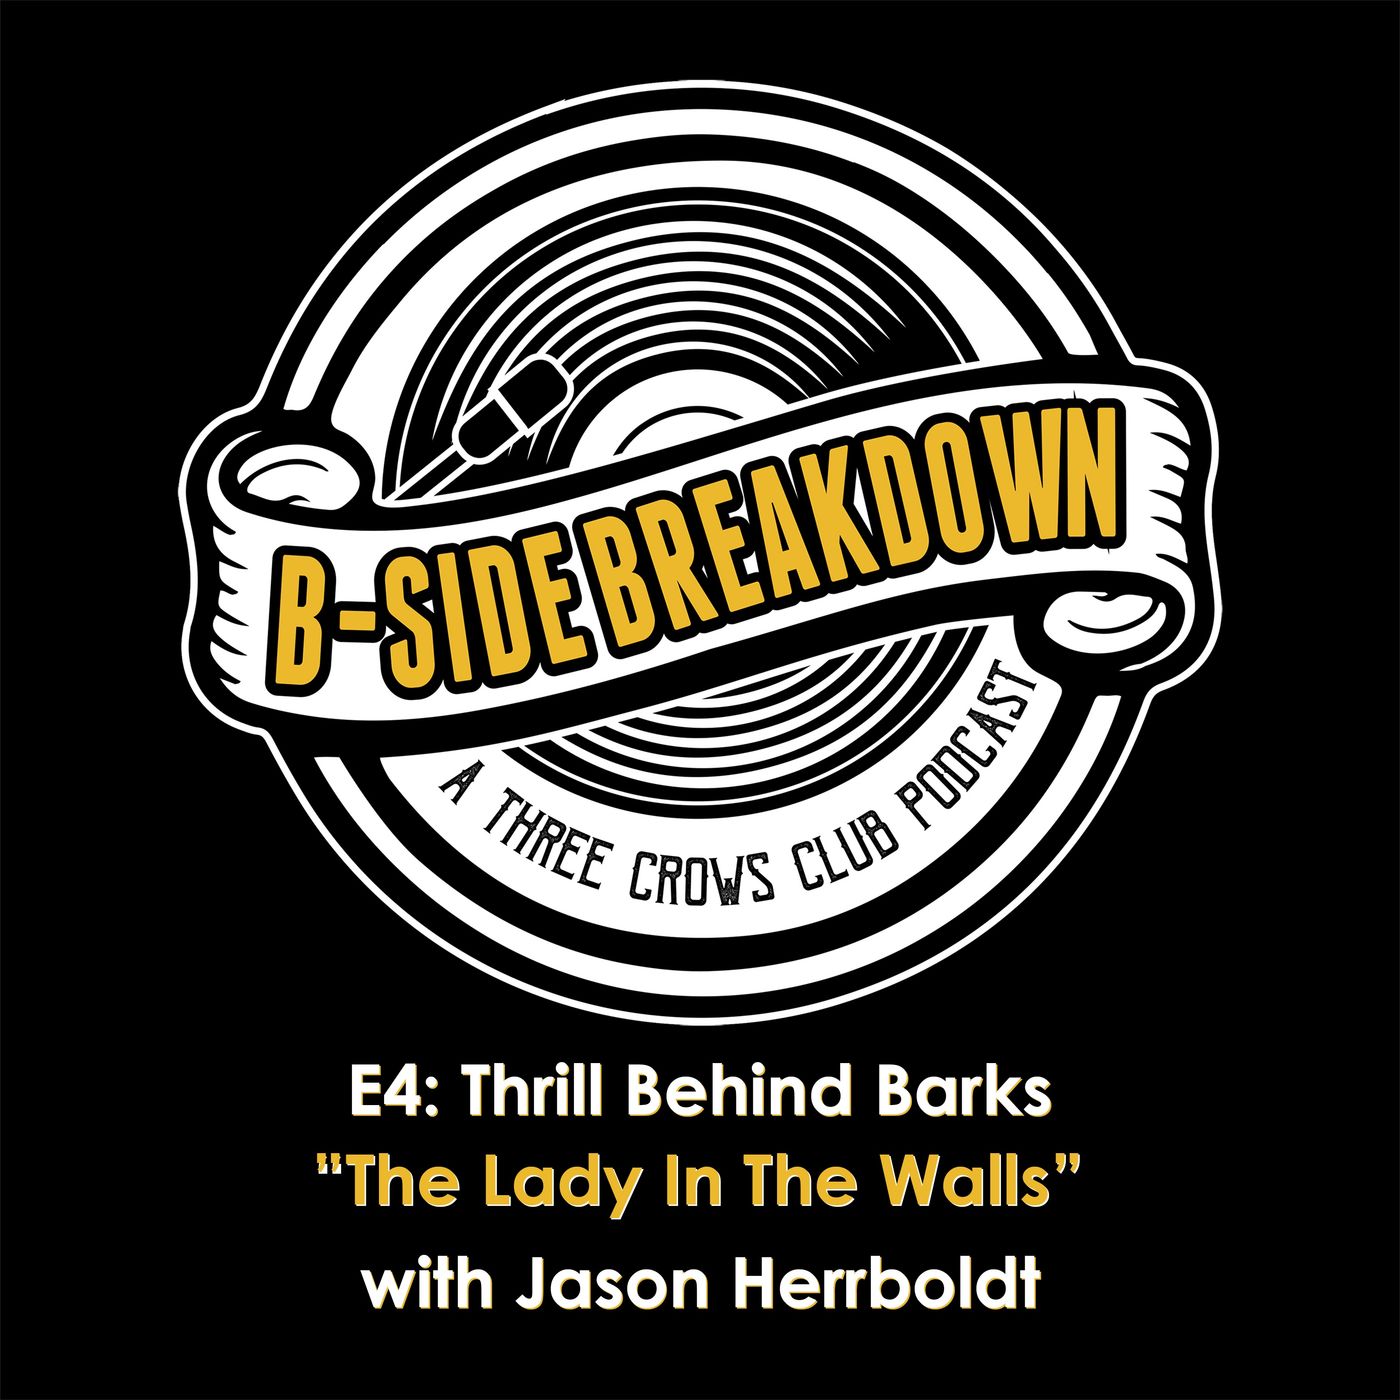 E4: "The Lady In The Walls" by Thrill Behind Barks with Jason Herrboldt